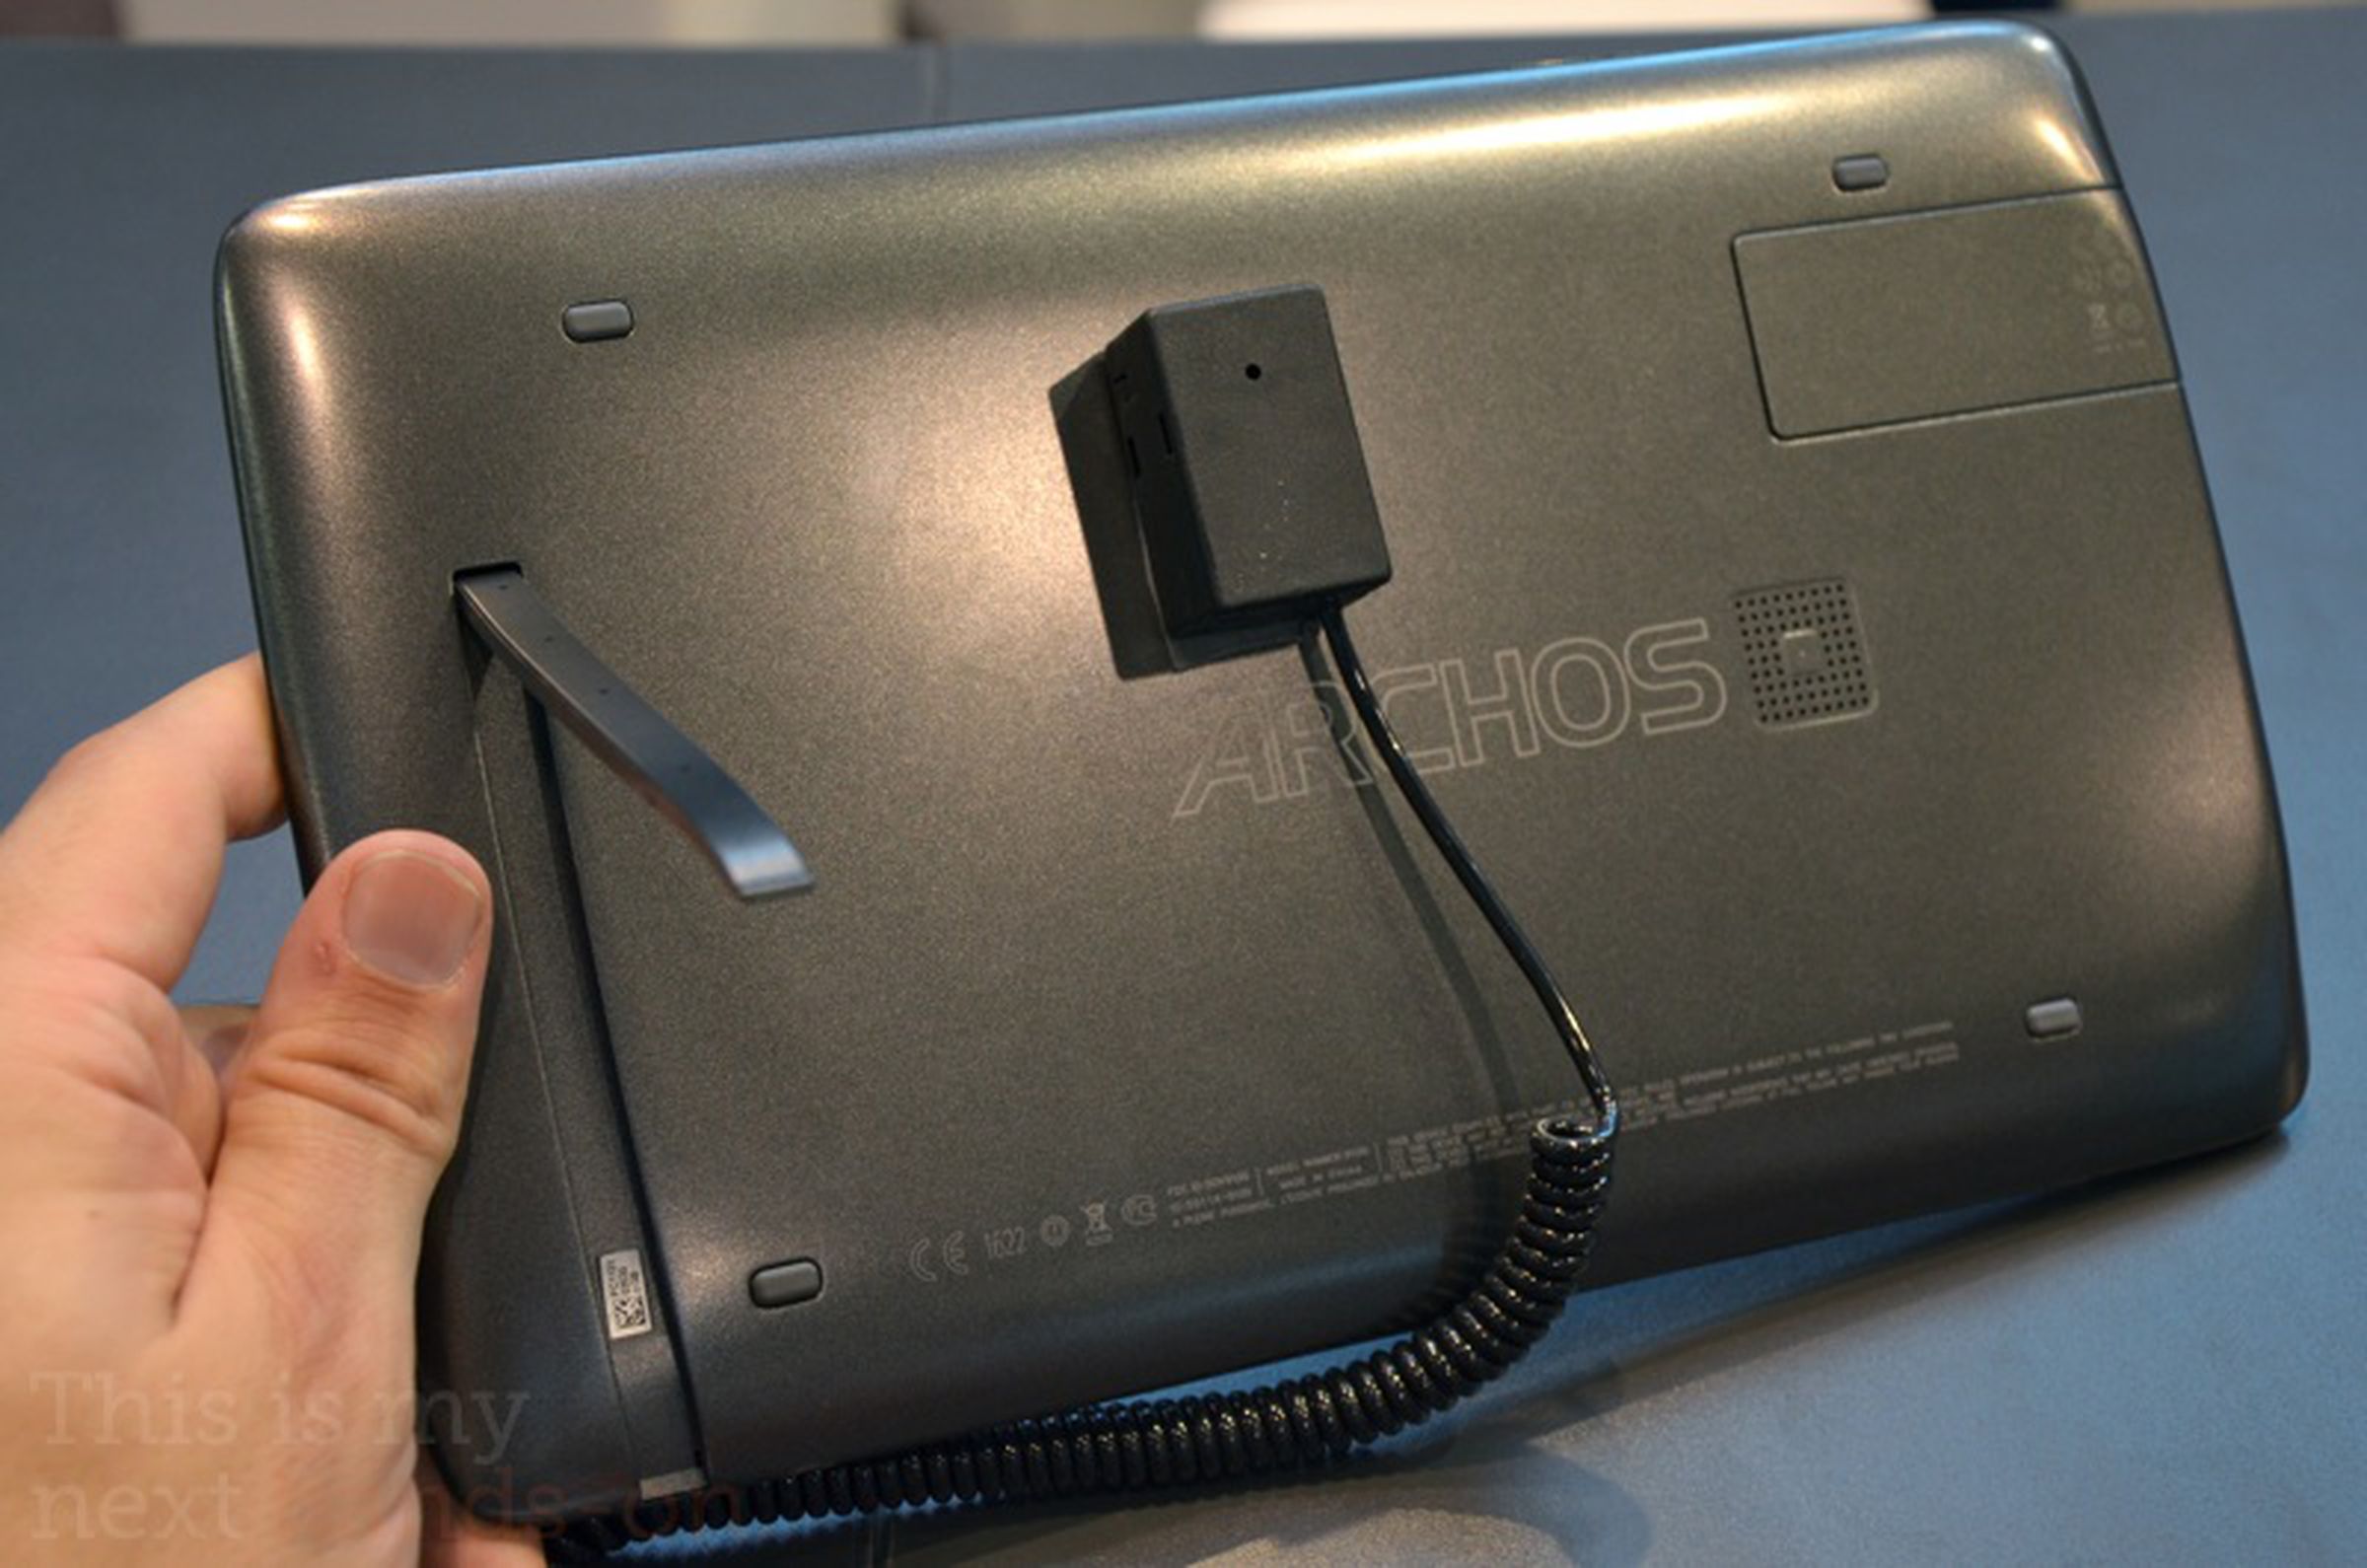 Archos 101 G9 and 80 G9 hands-on photos